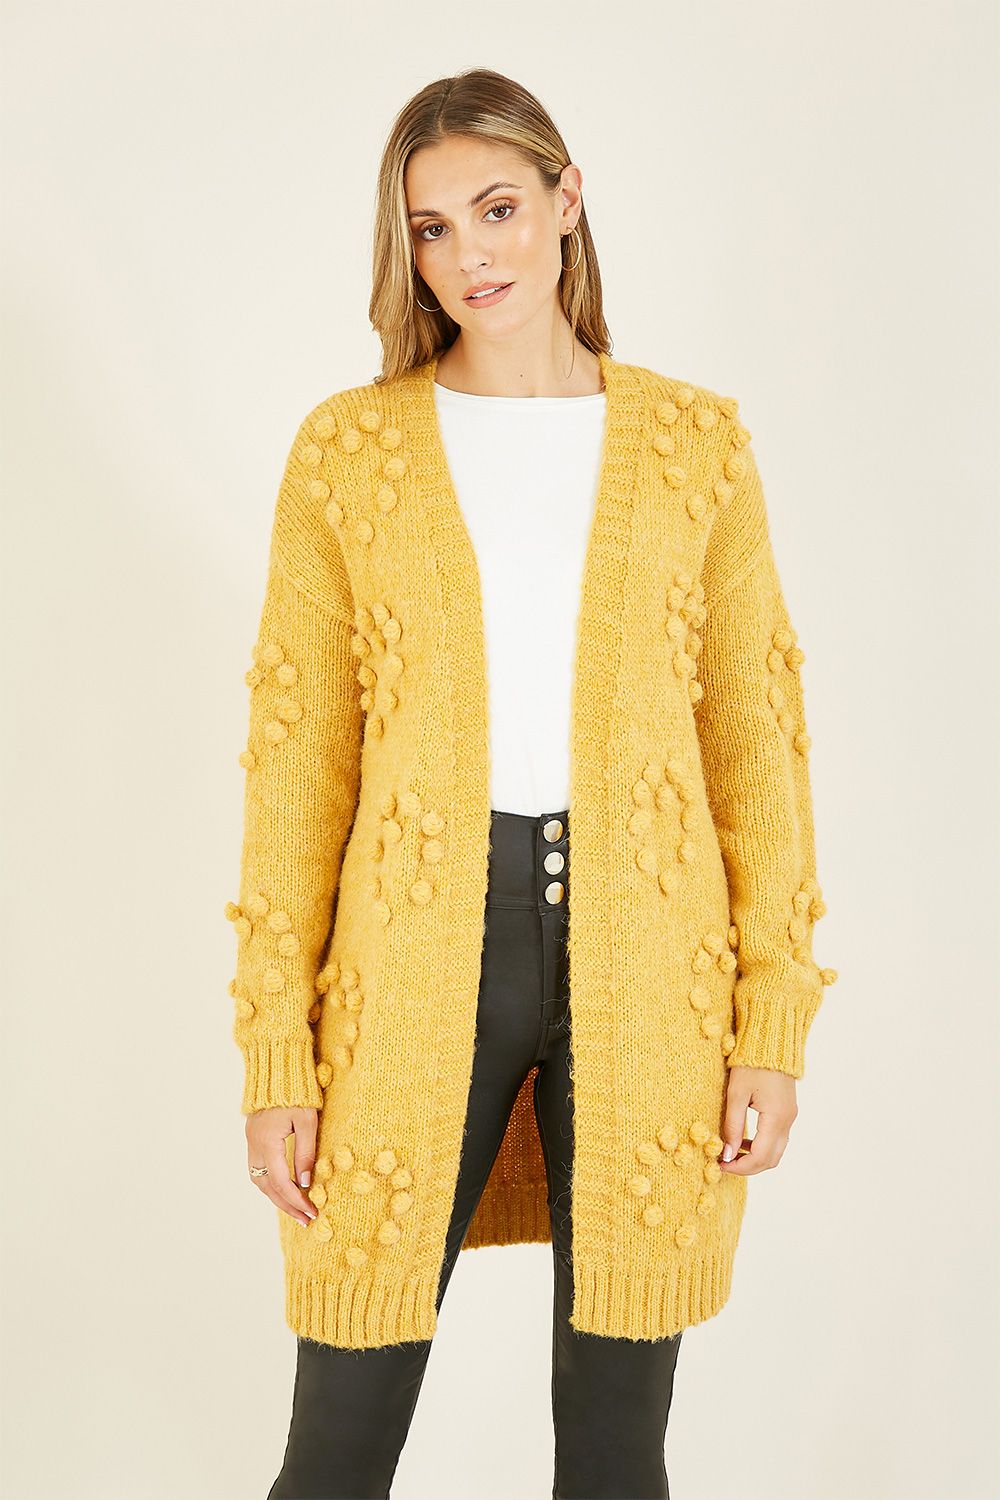 Super soft and in a stunning mustard, this Yumi Mustard Knitted Pom-Pom Heart Long Cardi features statement hand knitted pom poms crafted in heart shaped patterns. A gorgeous, relaxed long cardigan perfect for layering and causal yet cosy weekend wear.